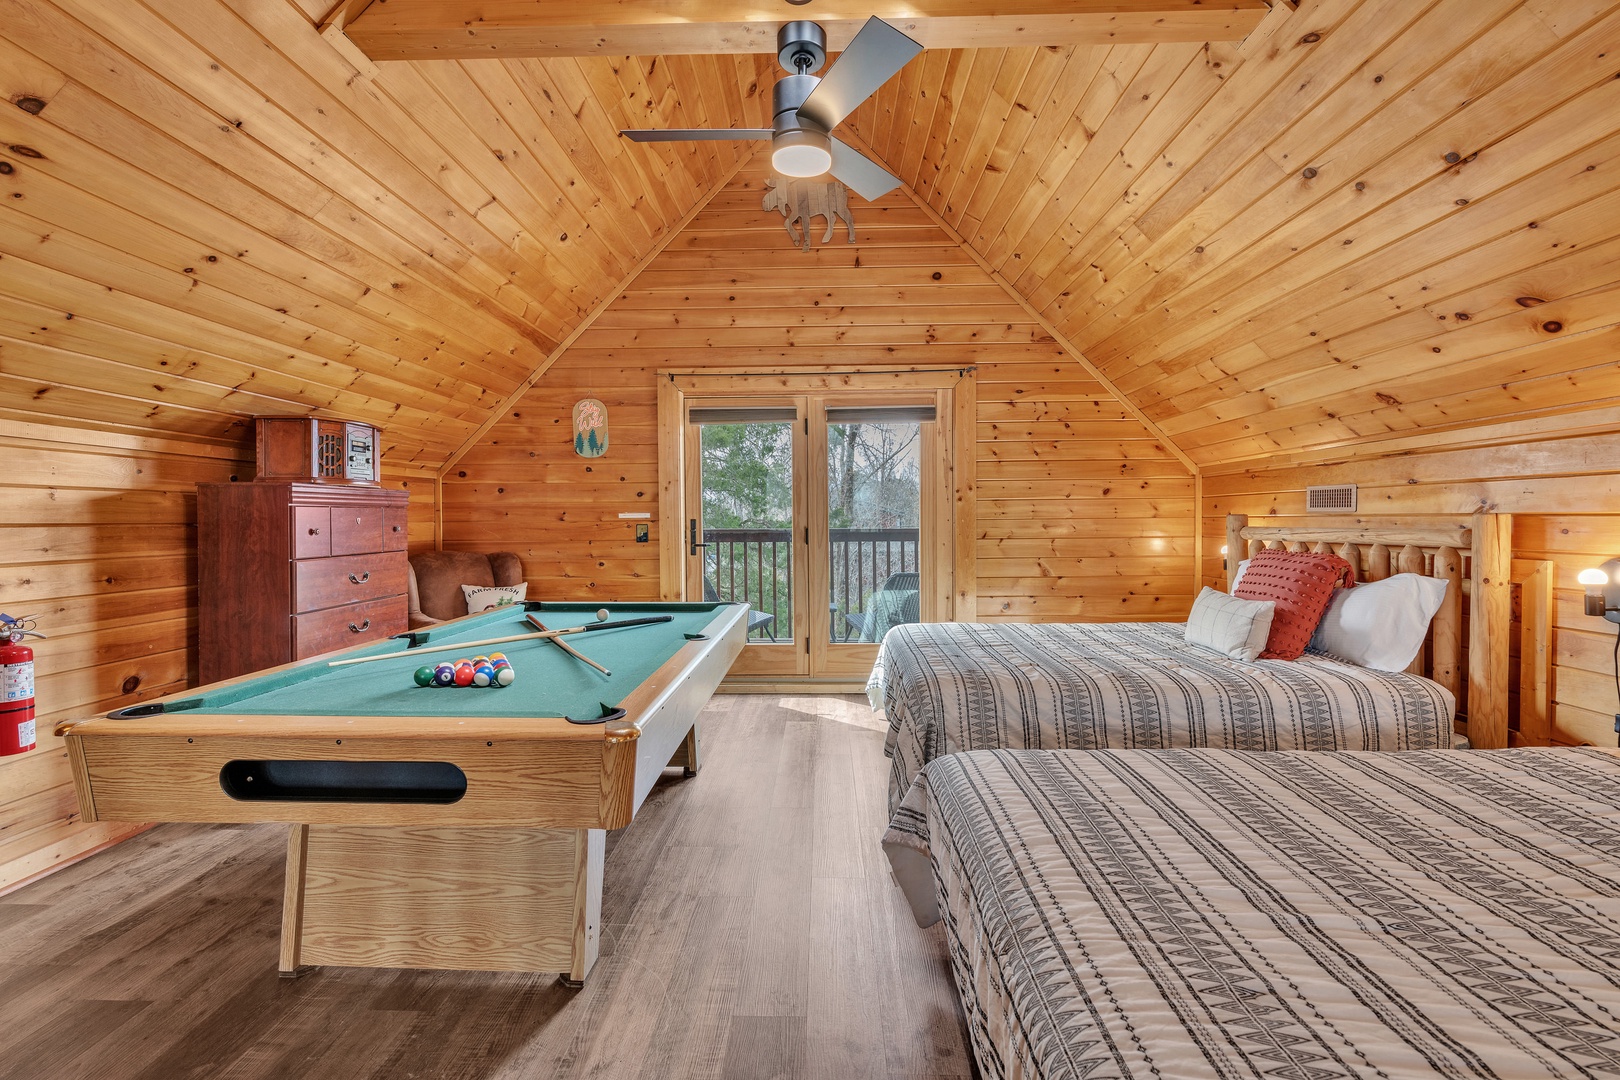 Enjoy the loft featuring a pool table and extra sleeping accommodations